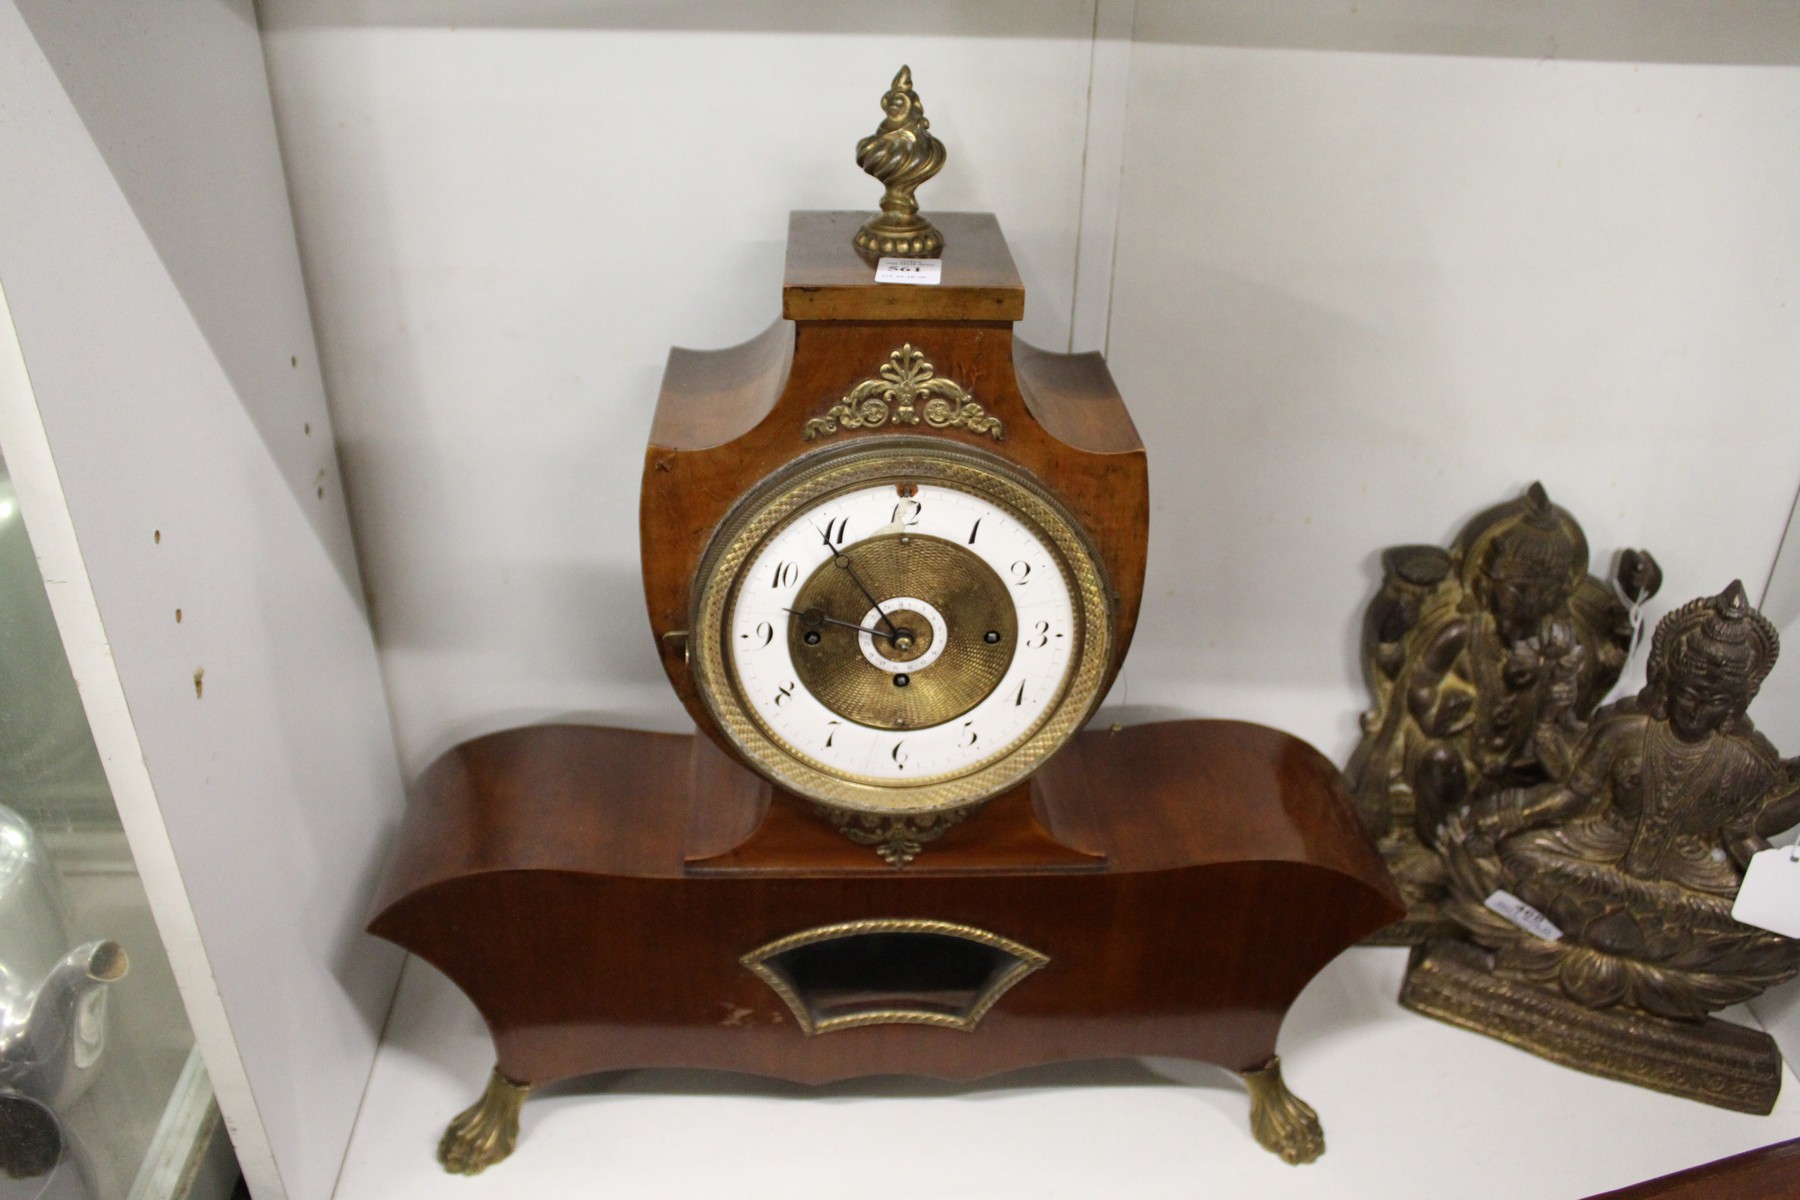 A late 19th century French mahogany mantle clock with twin porcelain dials.